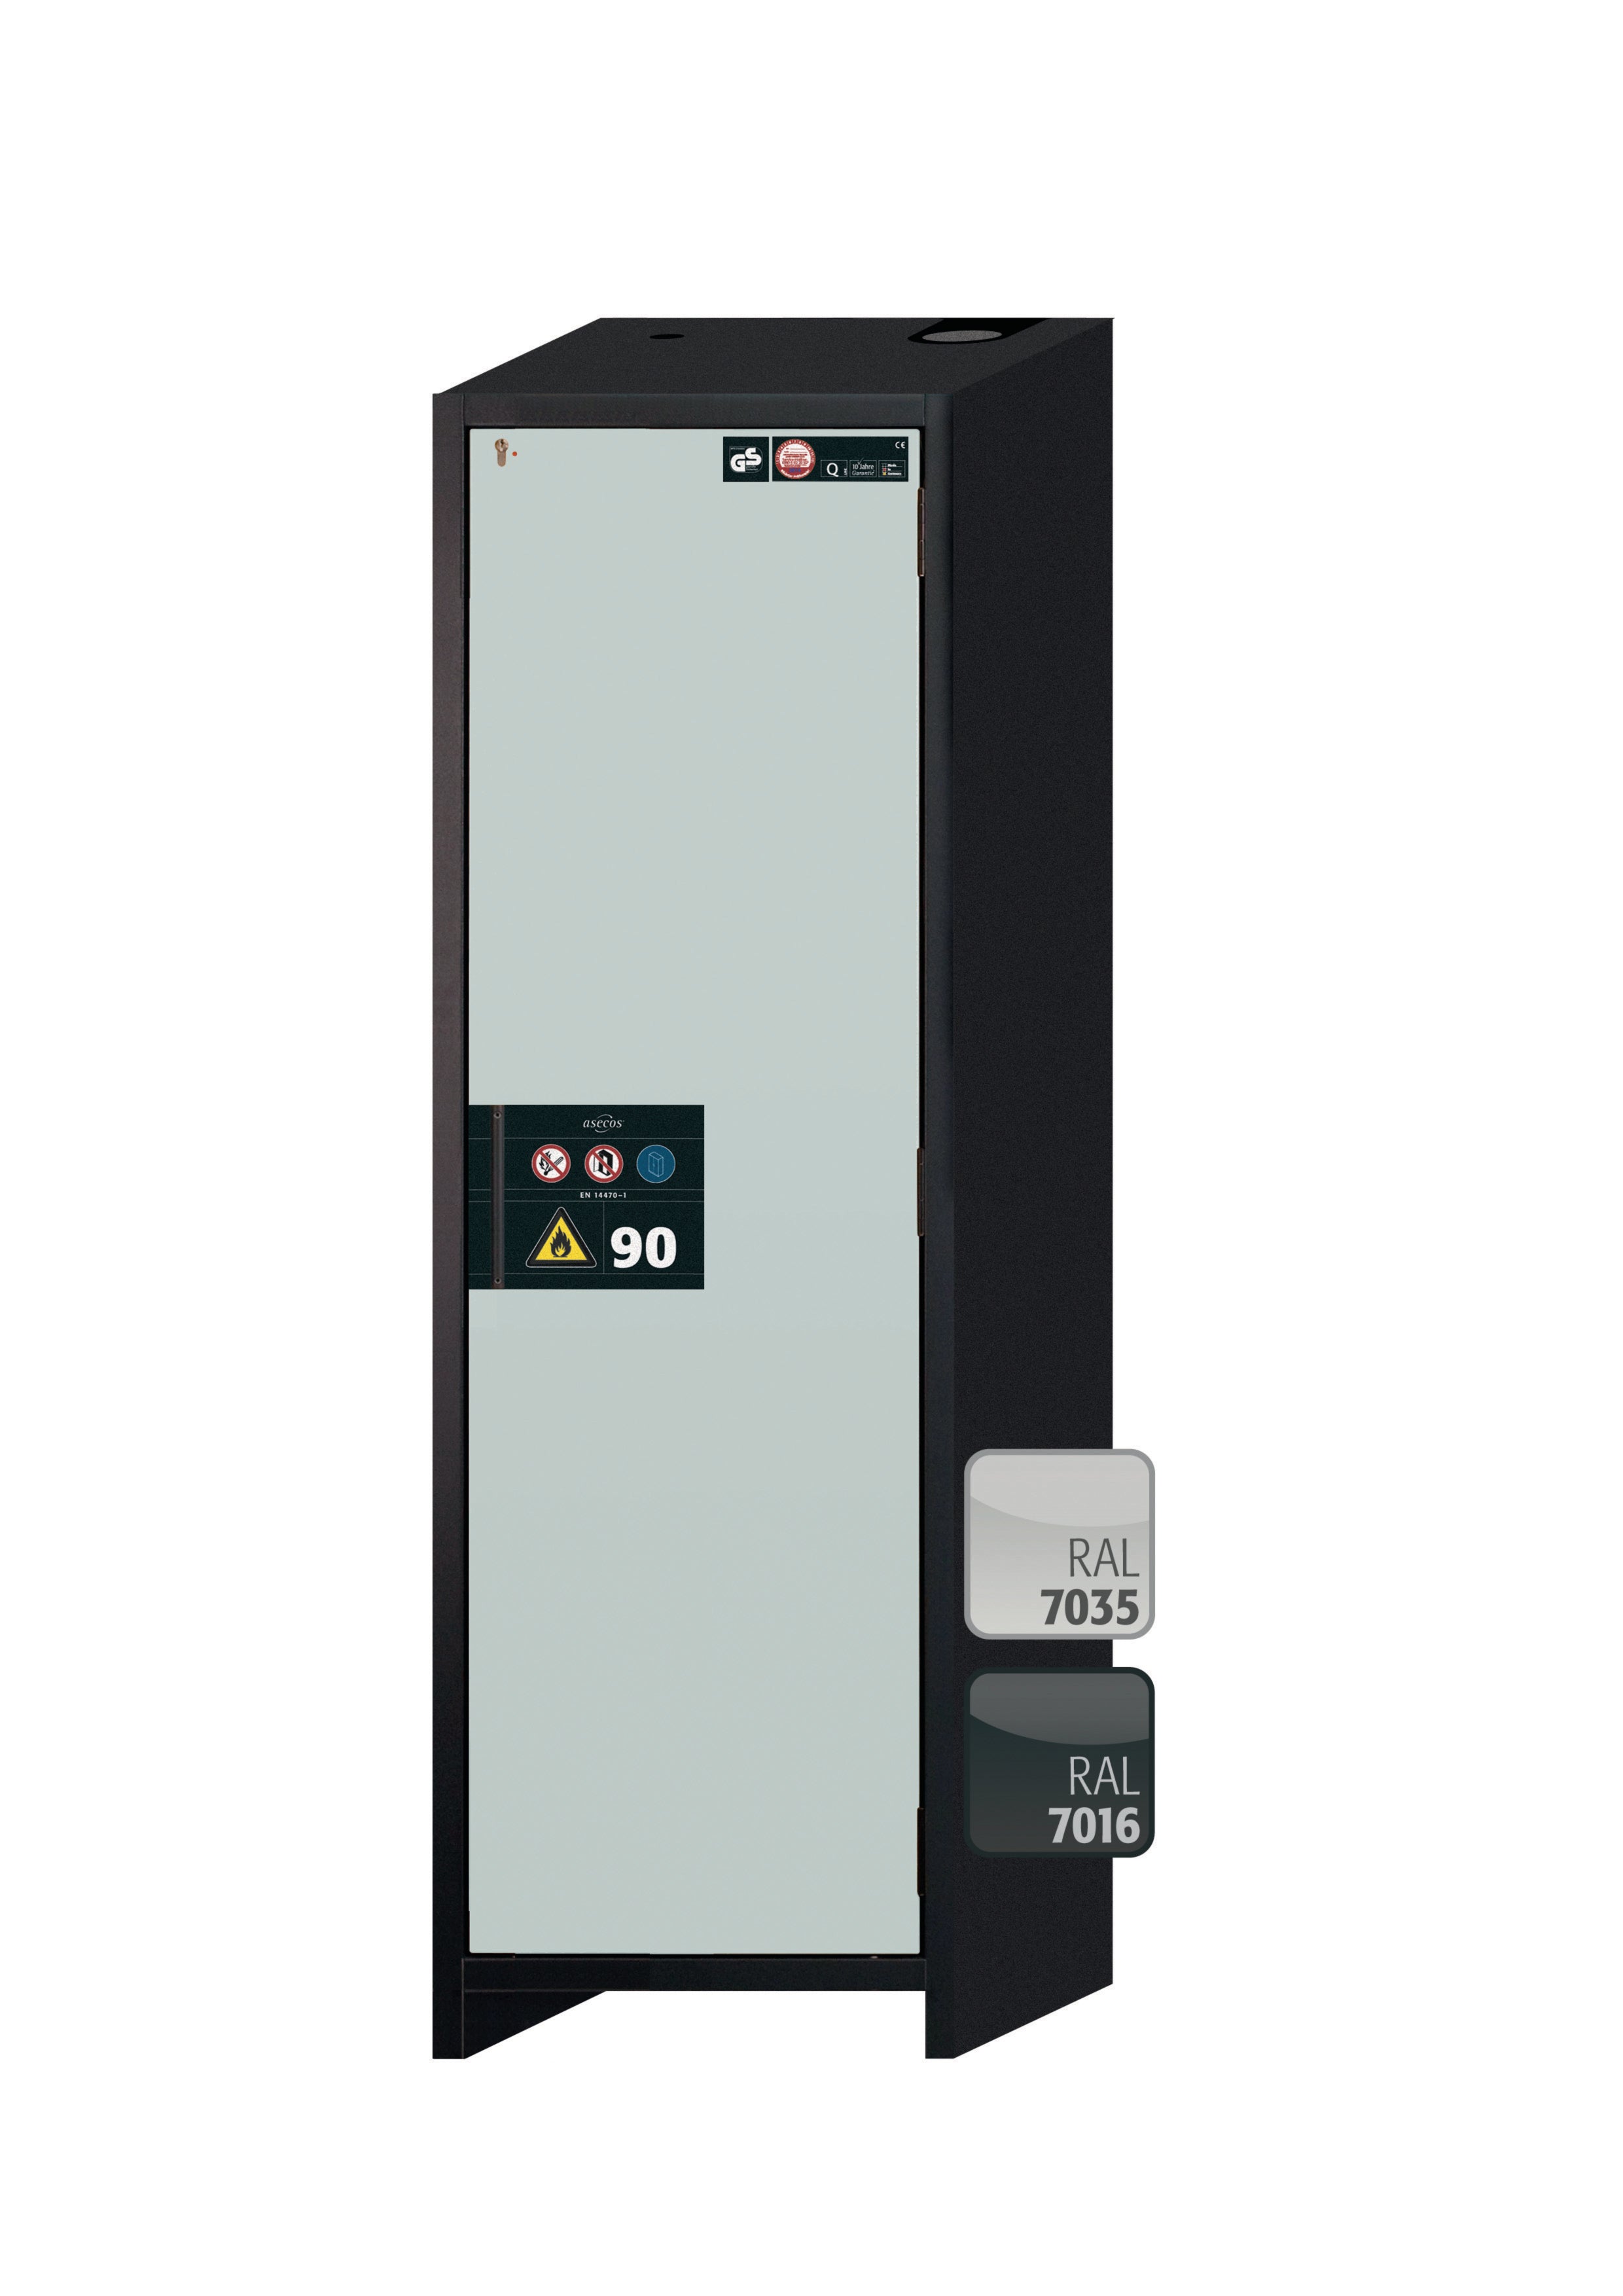 Type 90 safety storage cabinet Q-CLASSIC-90 model Q90.195.060.R in light grey RAL 7035 with 5x drawer (standard) (stainless steel 1.4301),